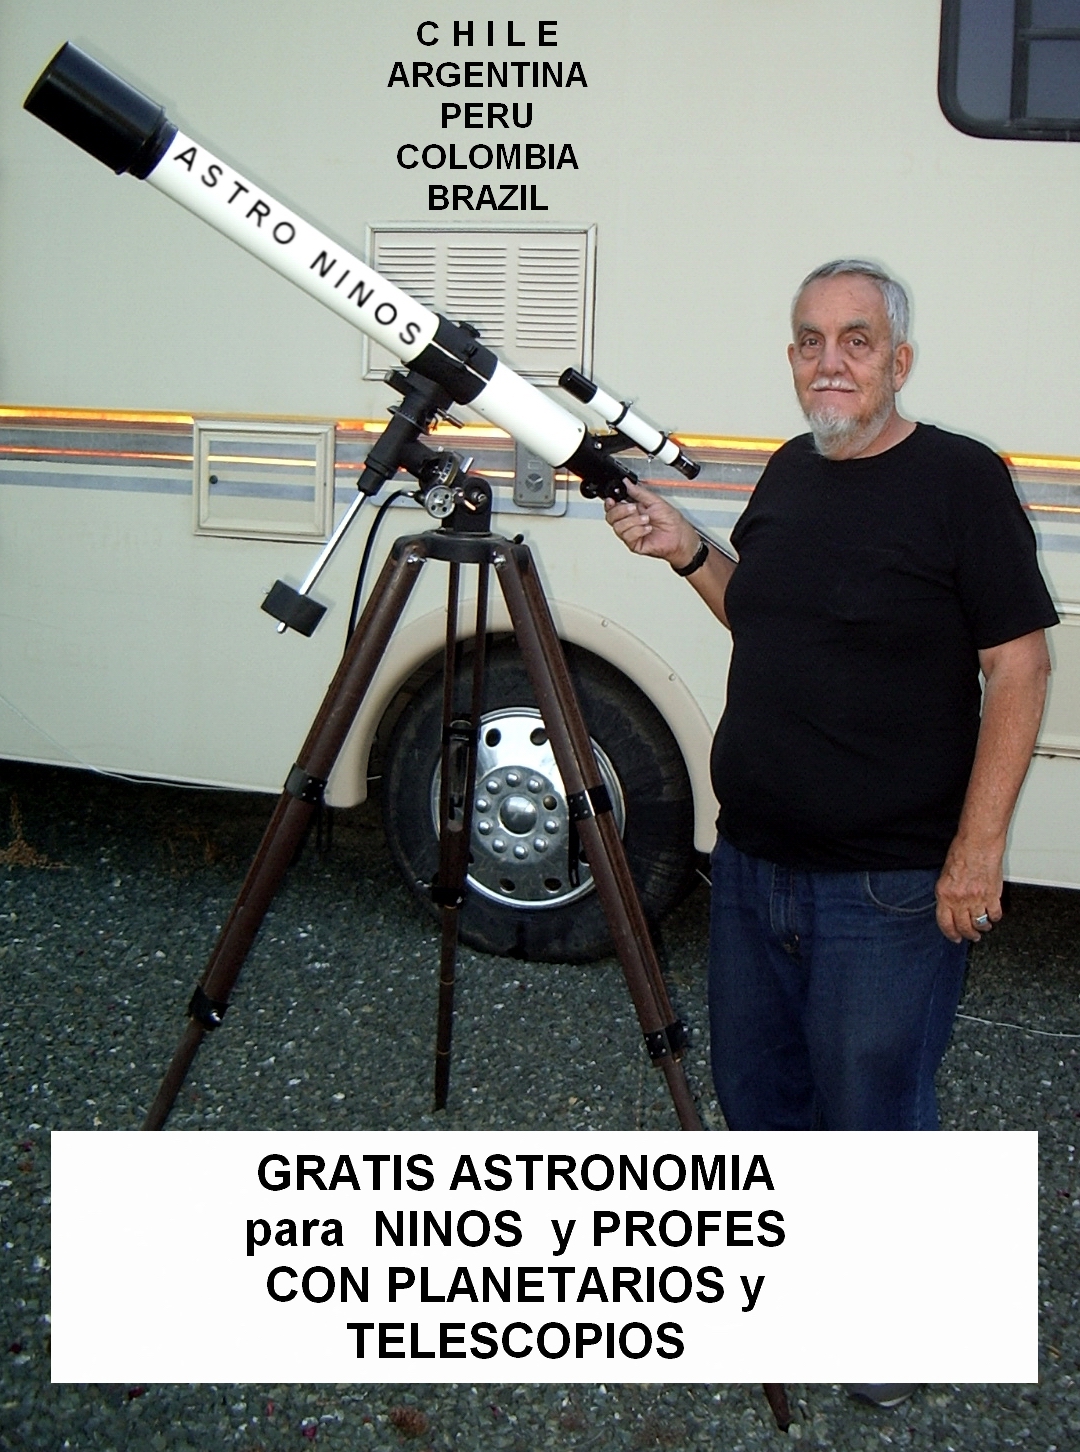 FREE ASTRONOMY OUTREACH for KIDS and TEACHERS in South America